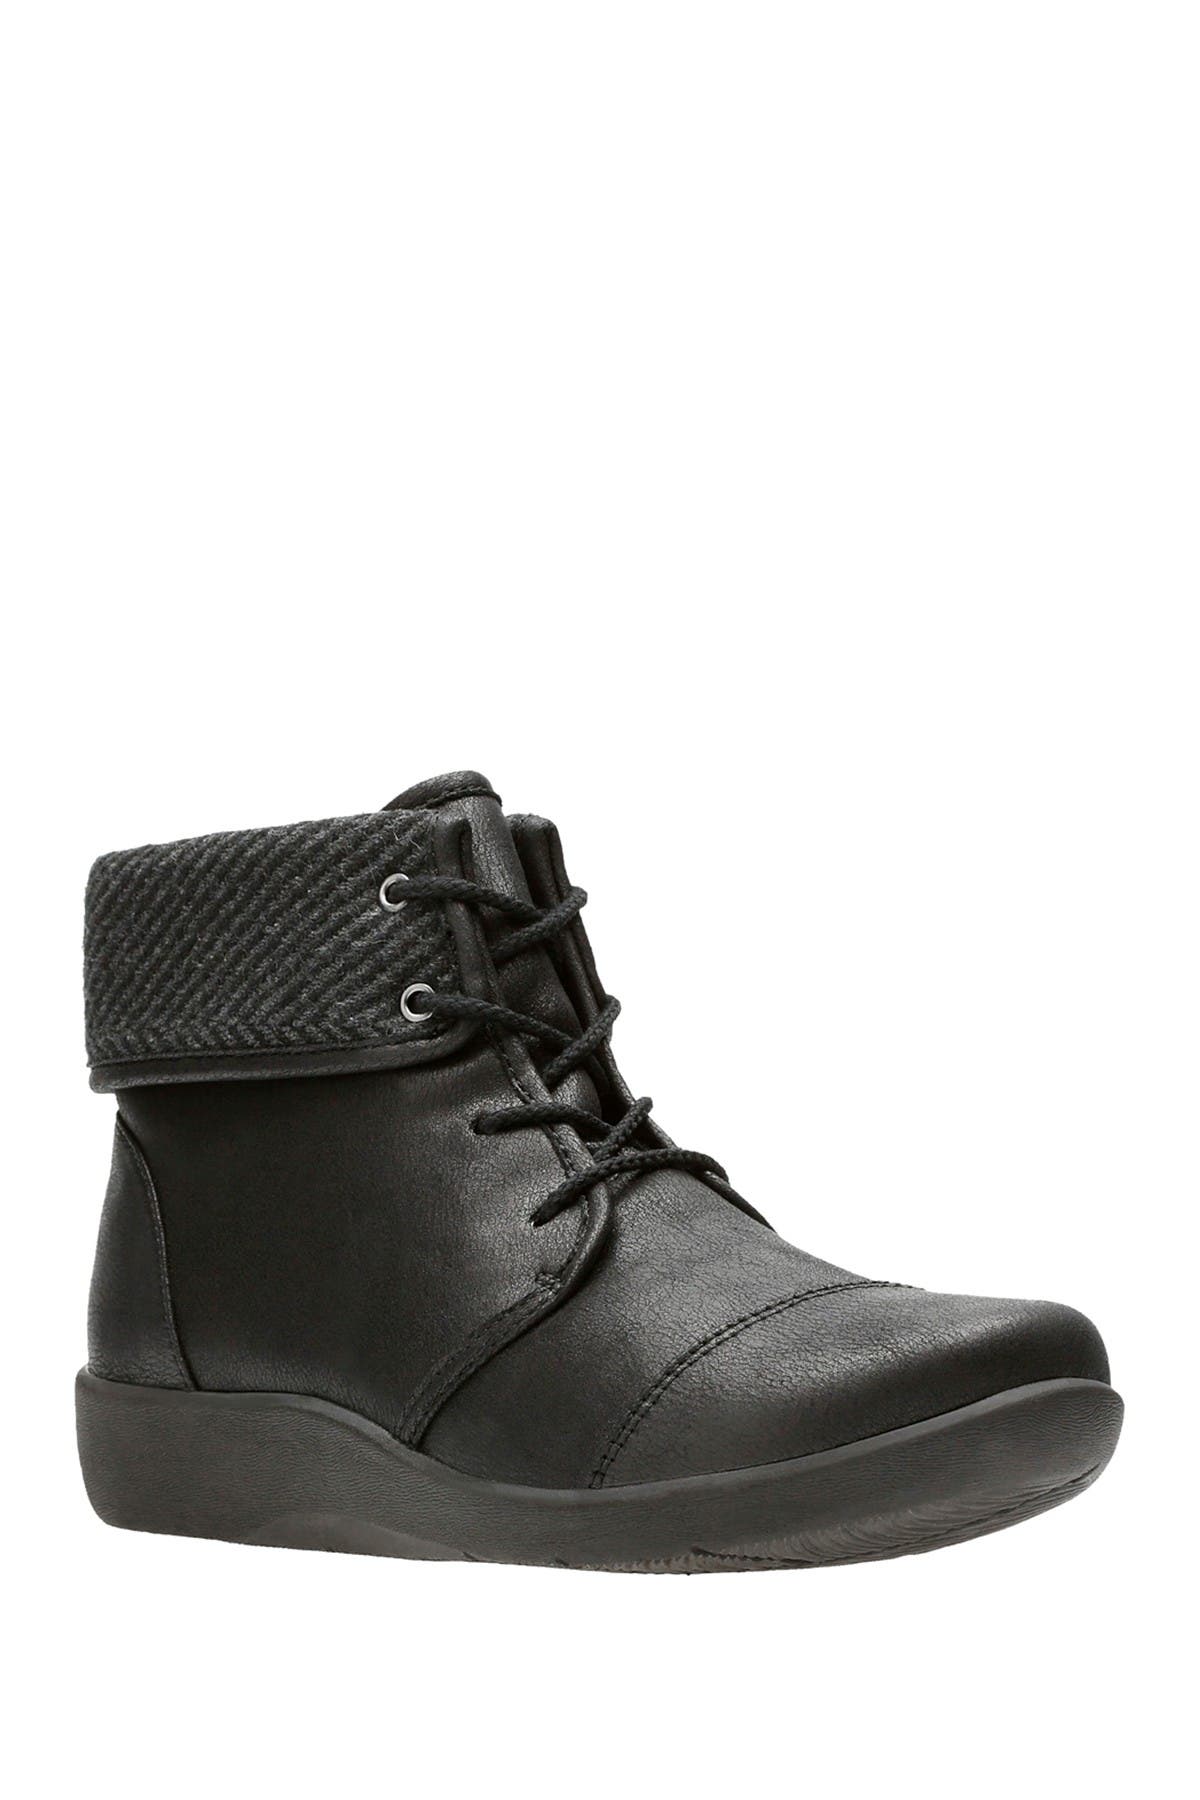 Clarks | Sillian Frey Lace-Up Boot 